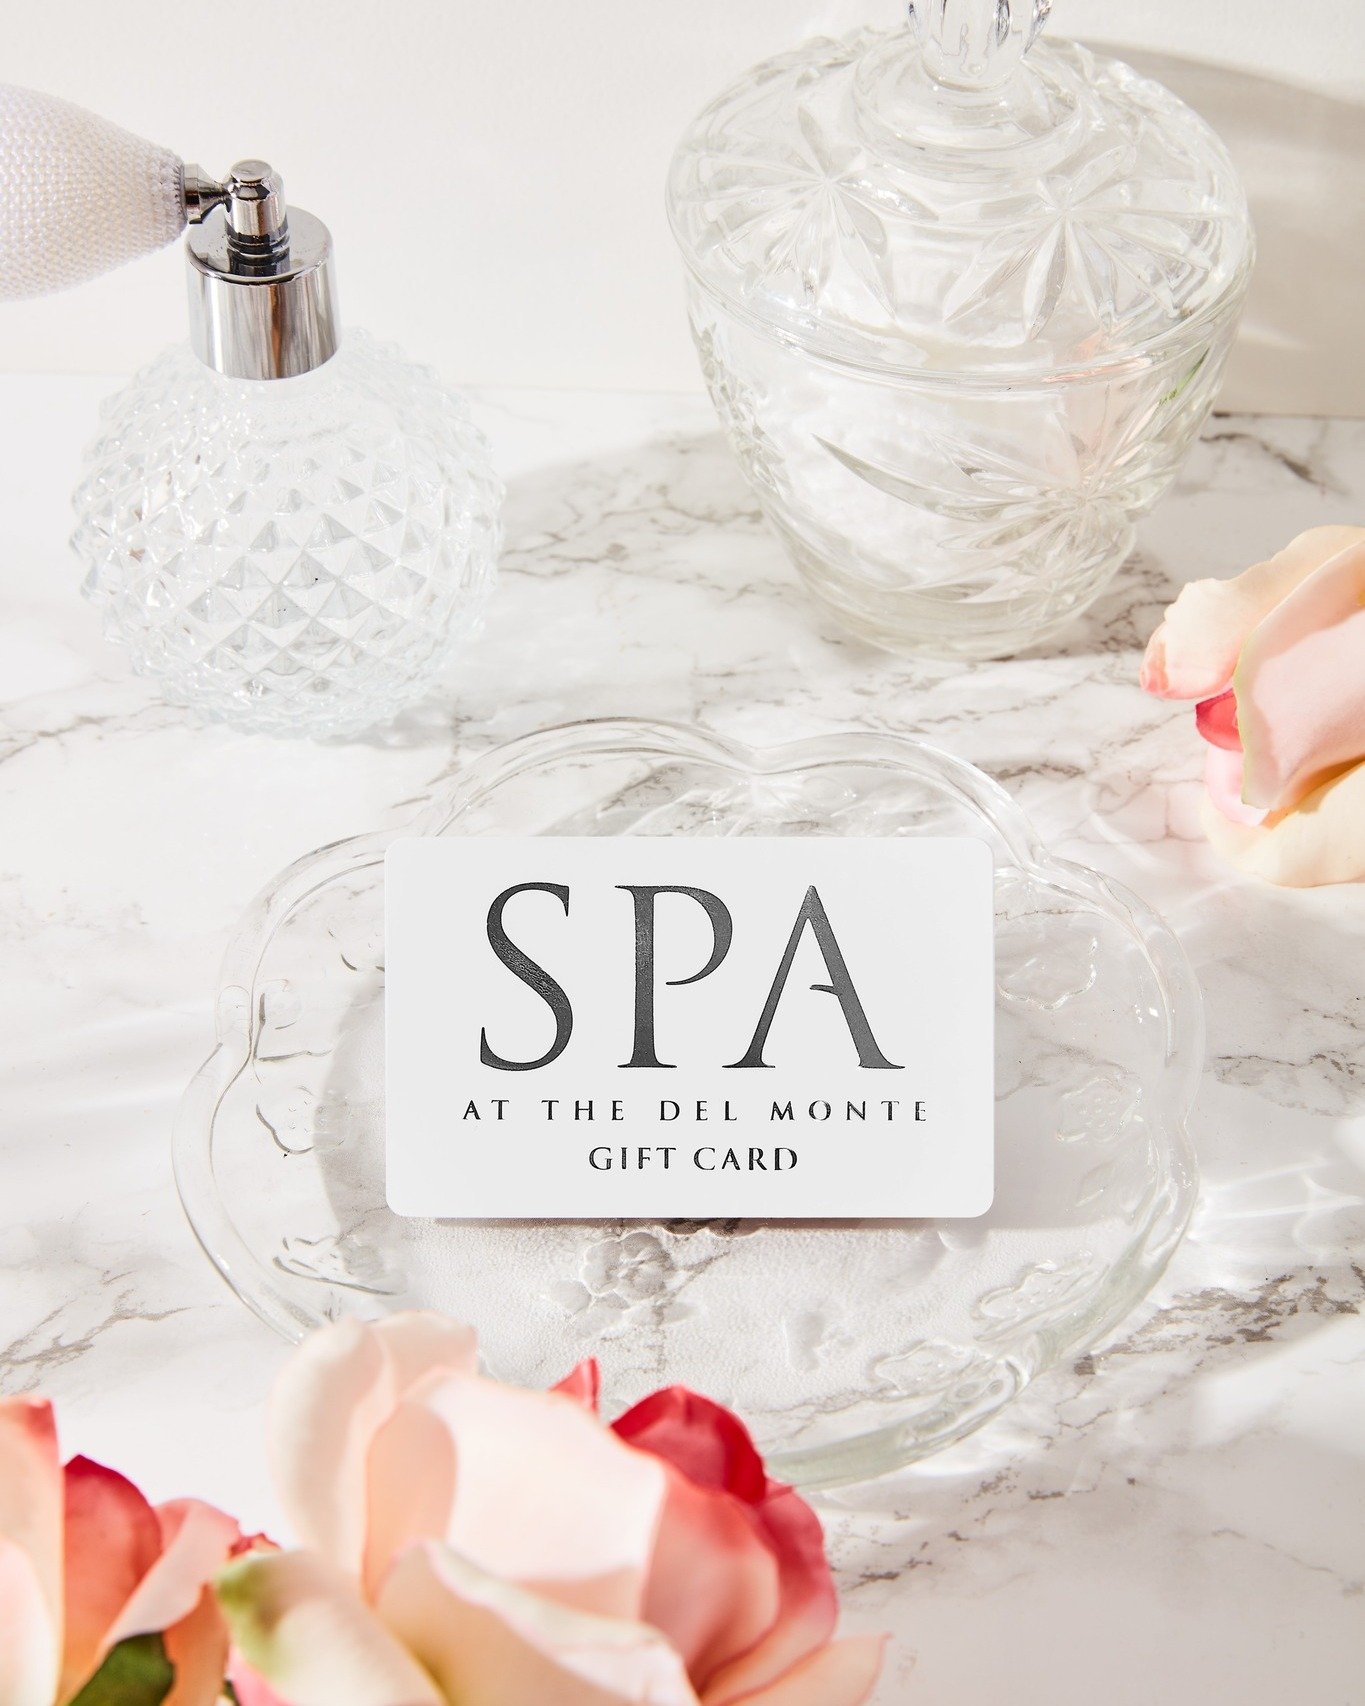 Every day should be Mother's Day 💝
.
.
.
Don't forget, Mother's Day is this weekend! Give her the gift of self care with a gift card to the Spa at the Del Monte!
.
#delmontespa #skinhealth #spalife #spalife #spa #dayspa #pittsford #skincare #shoploc